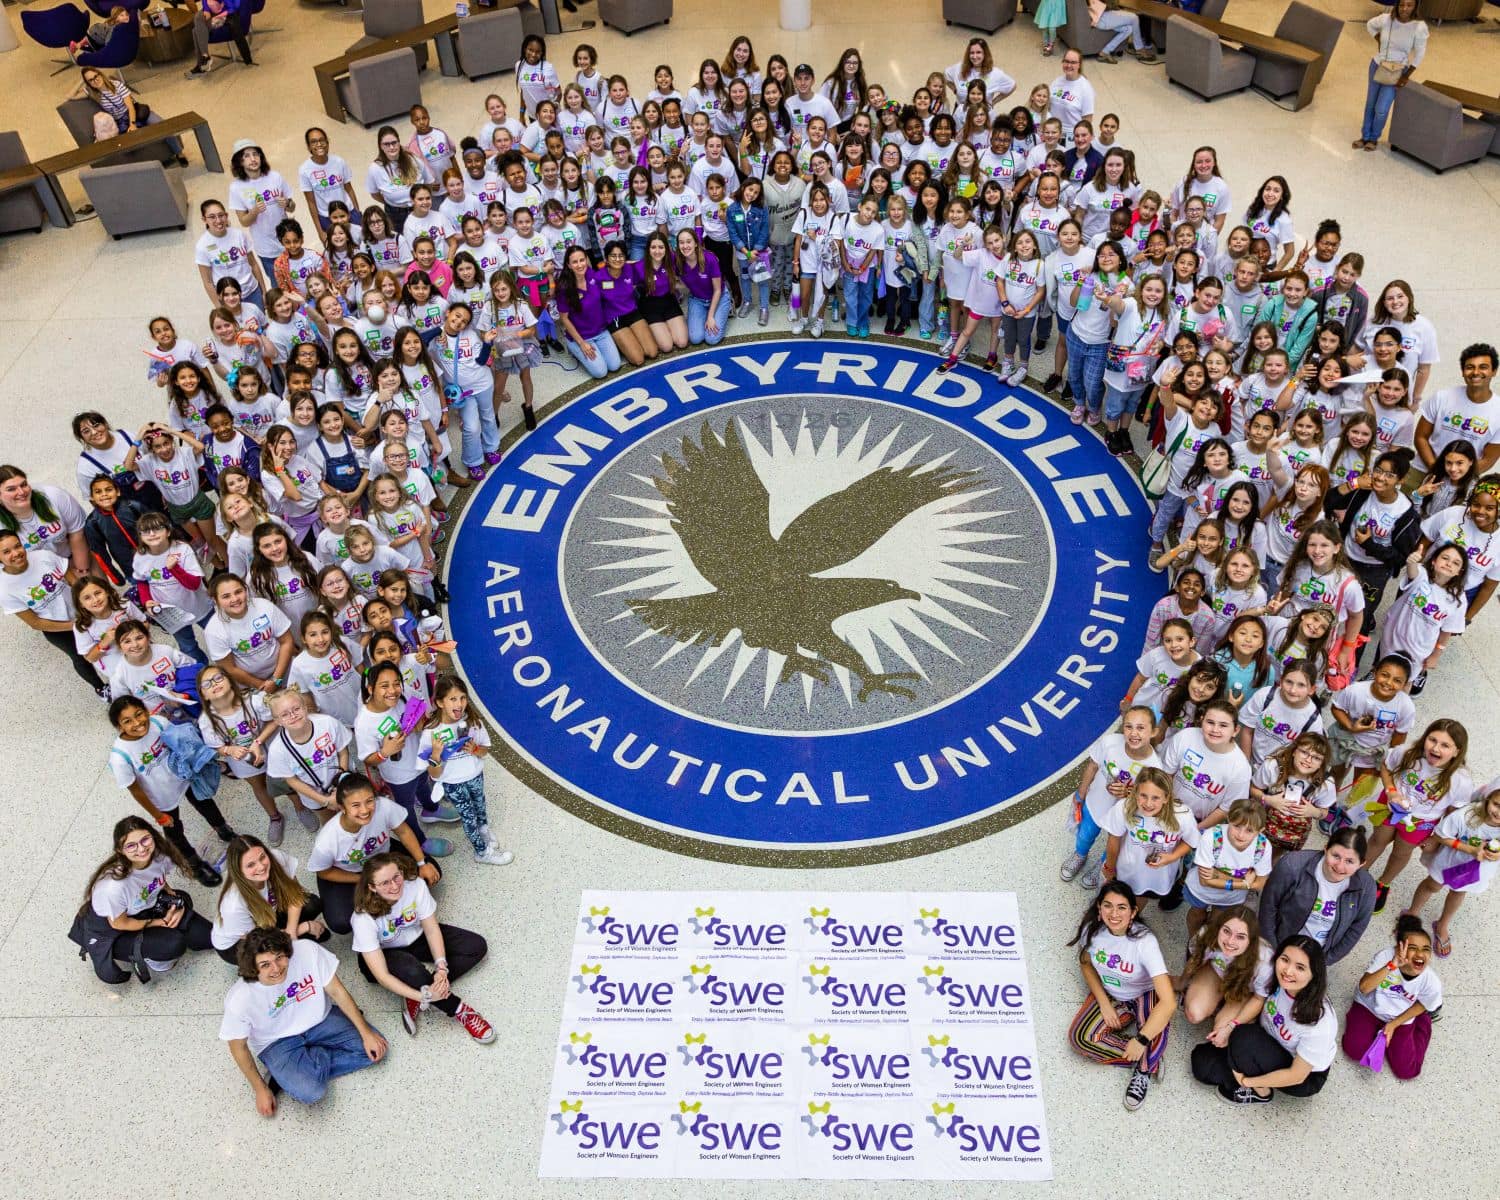 Students from Volusia County schools pose around the Embry-Riddle seal in the Mori Hosseini Student Union during a day-long workshop led by the Society of Women Engineers (SWE) Collegiate Section at the Daytona Beach campus on Feb. 11, 2023. (Photo: Embry-Riddle / Sergio Carli)